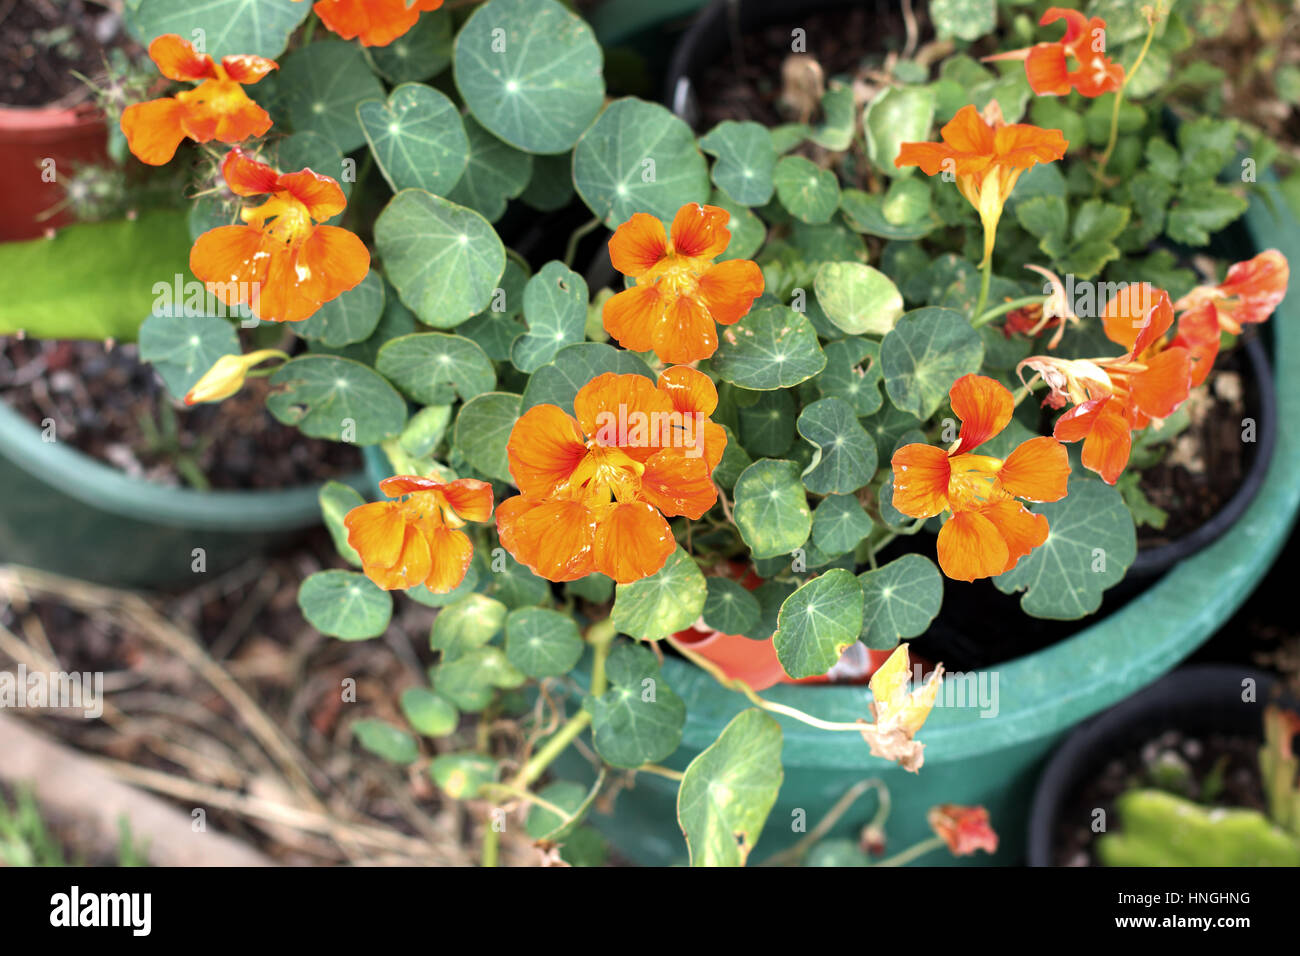 Nasturtium plant also known as Tropaeolum majus with flowers  growing in a pot Stock Photo